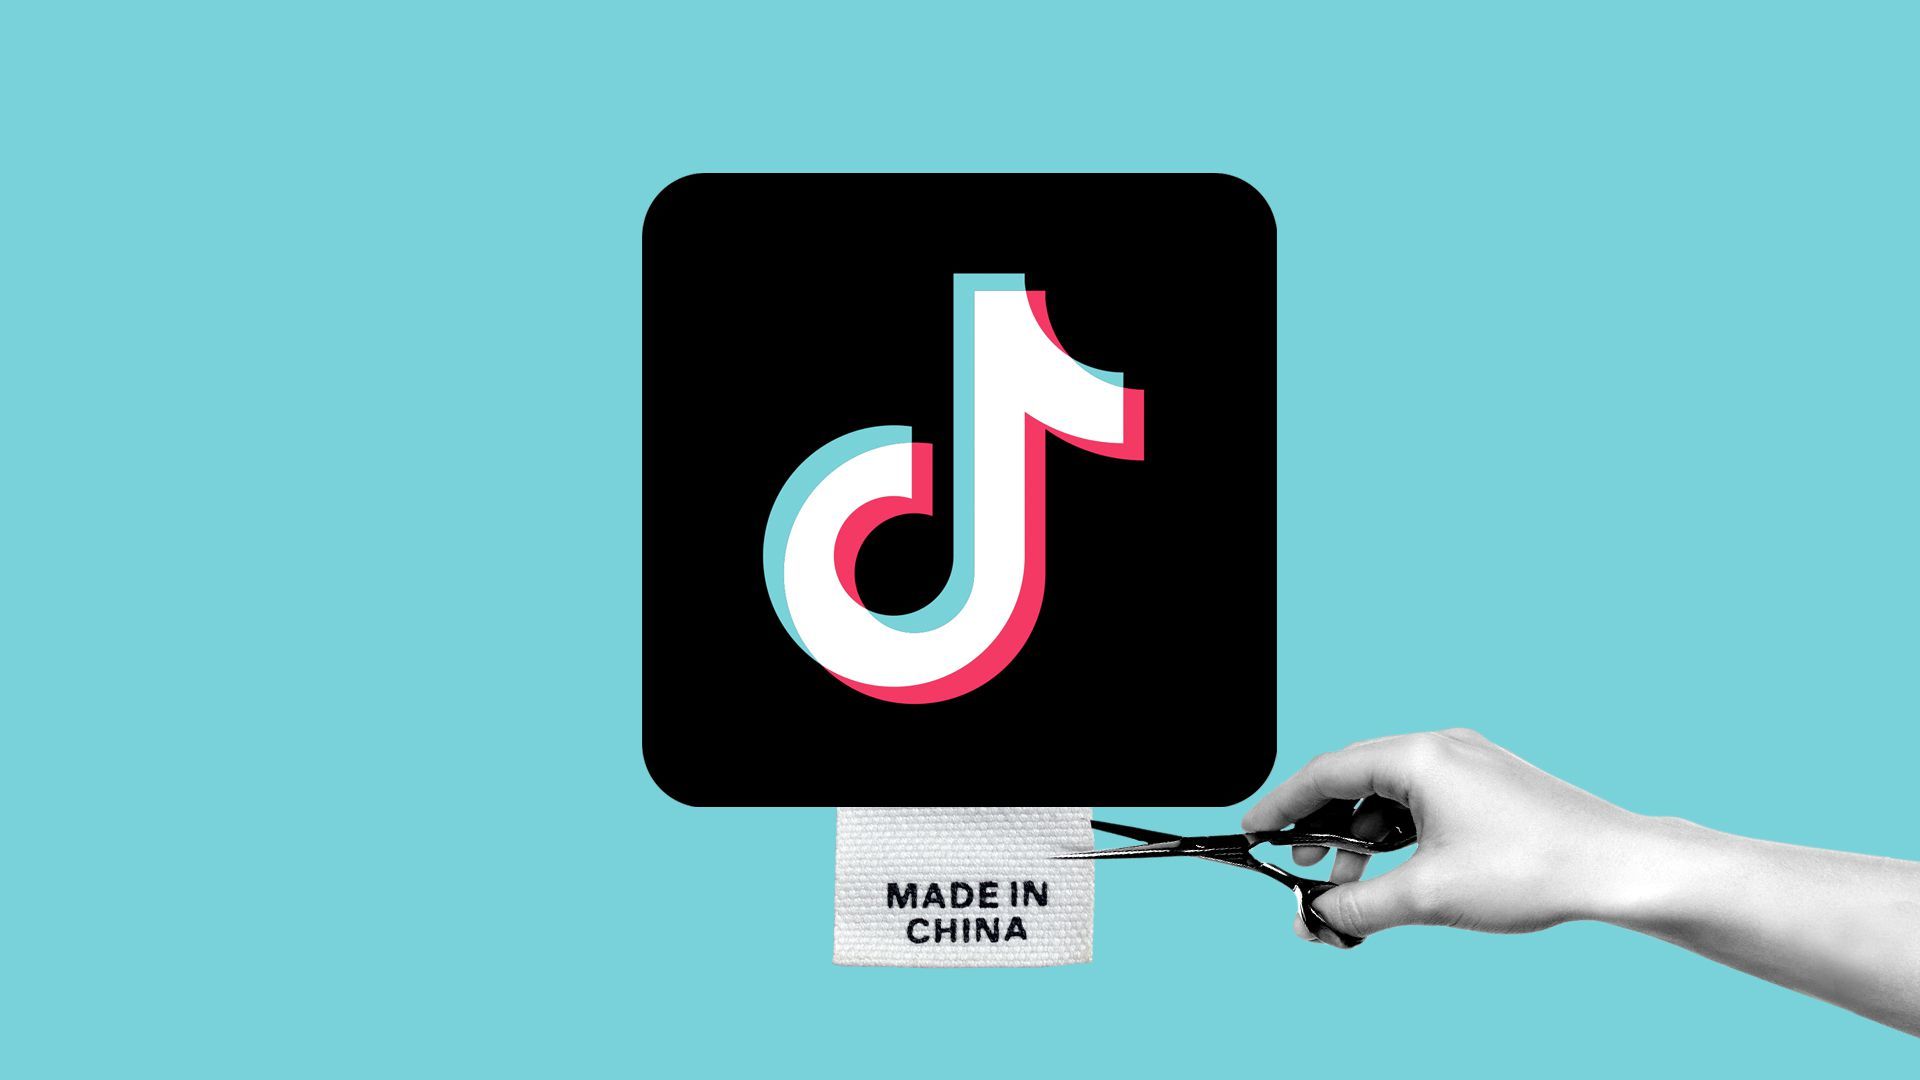 Illustration of a TikTok logo with a Made in China tag being cut off.